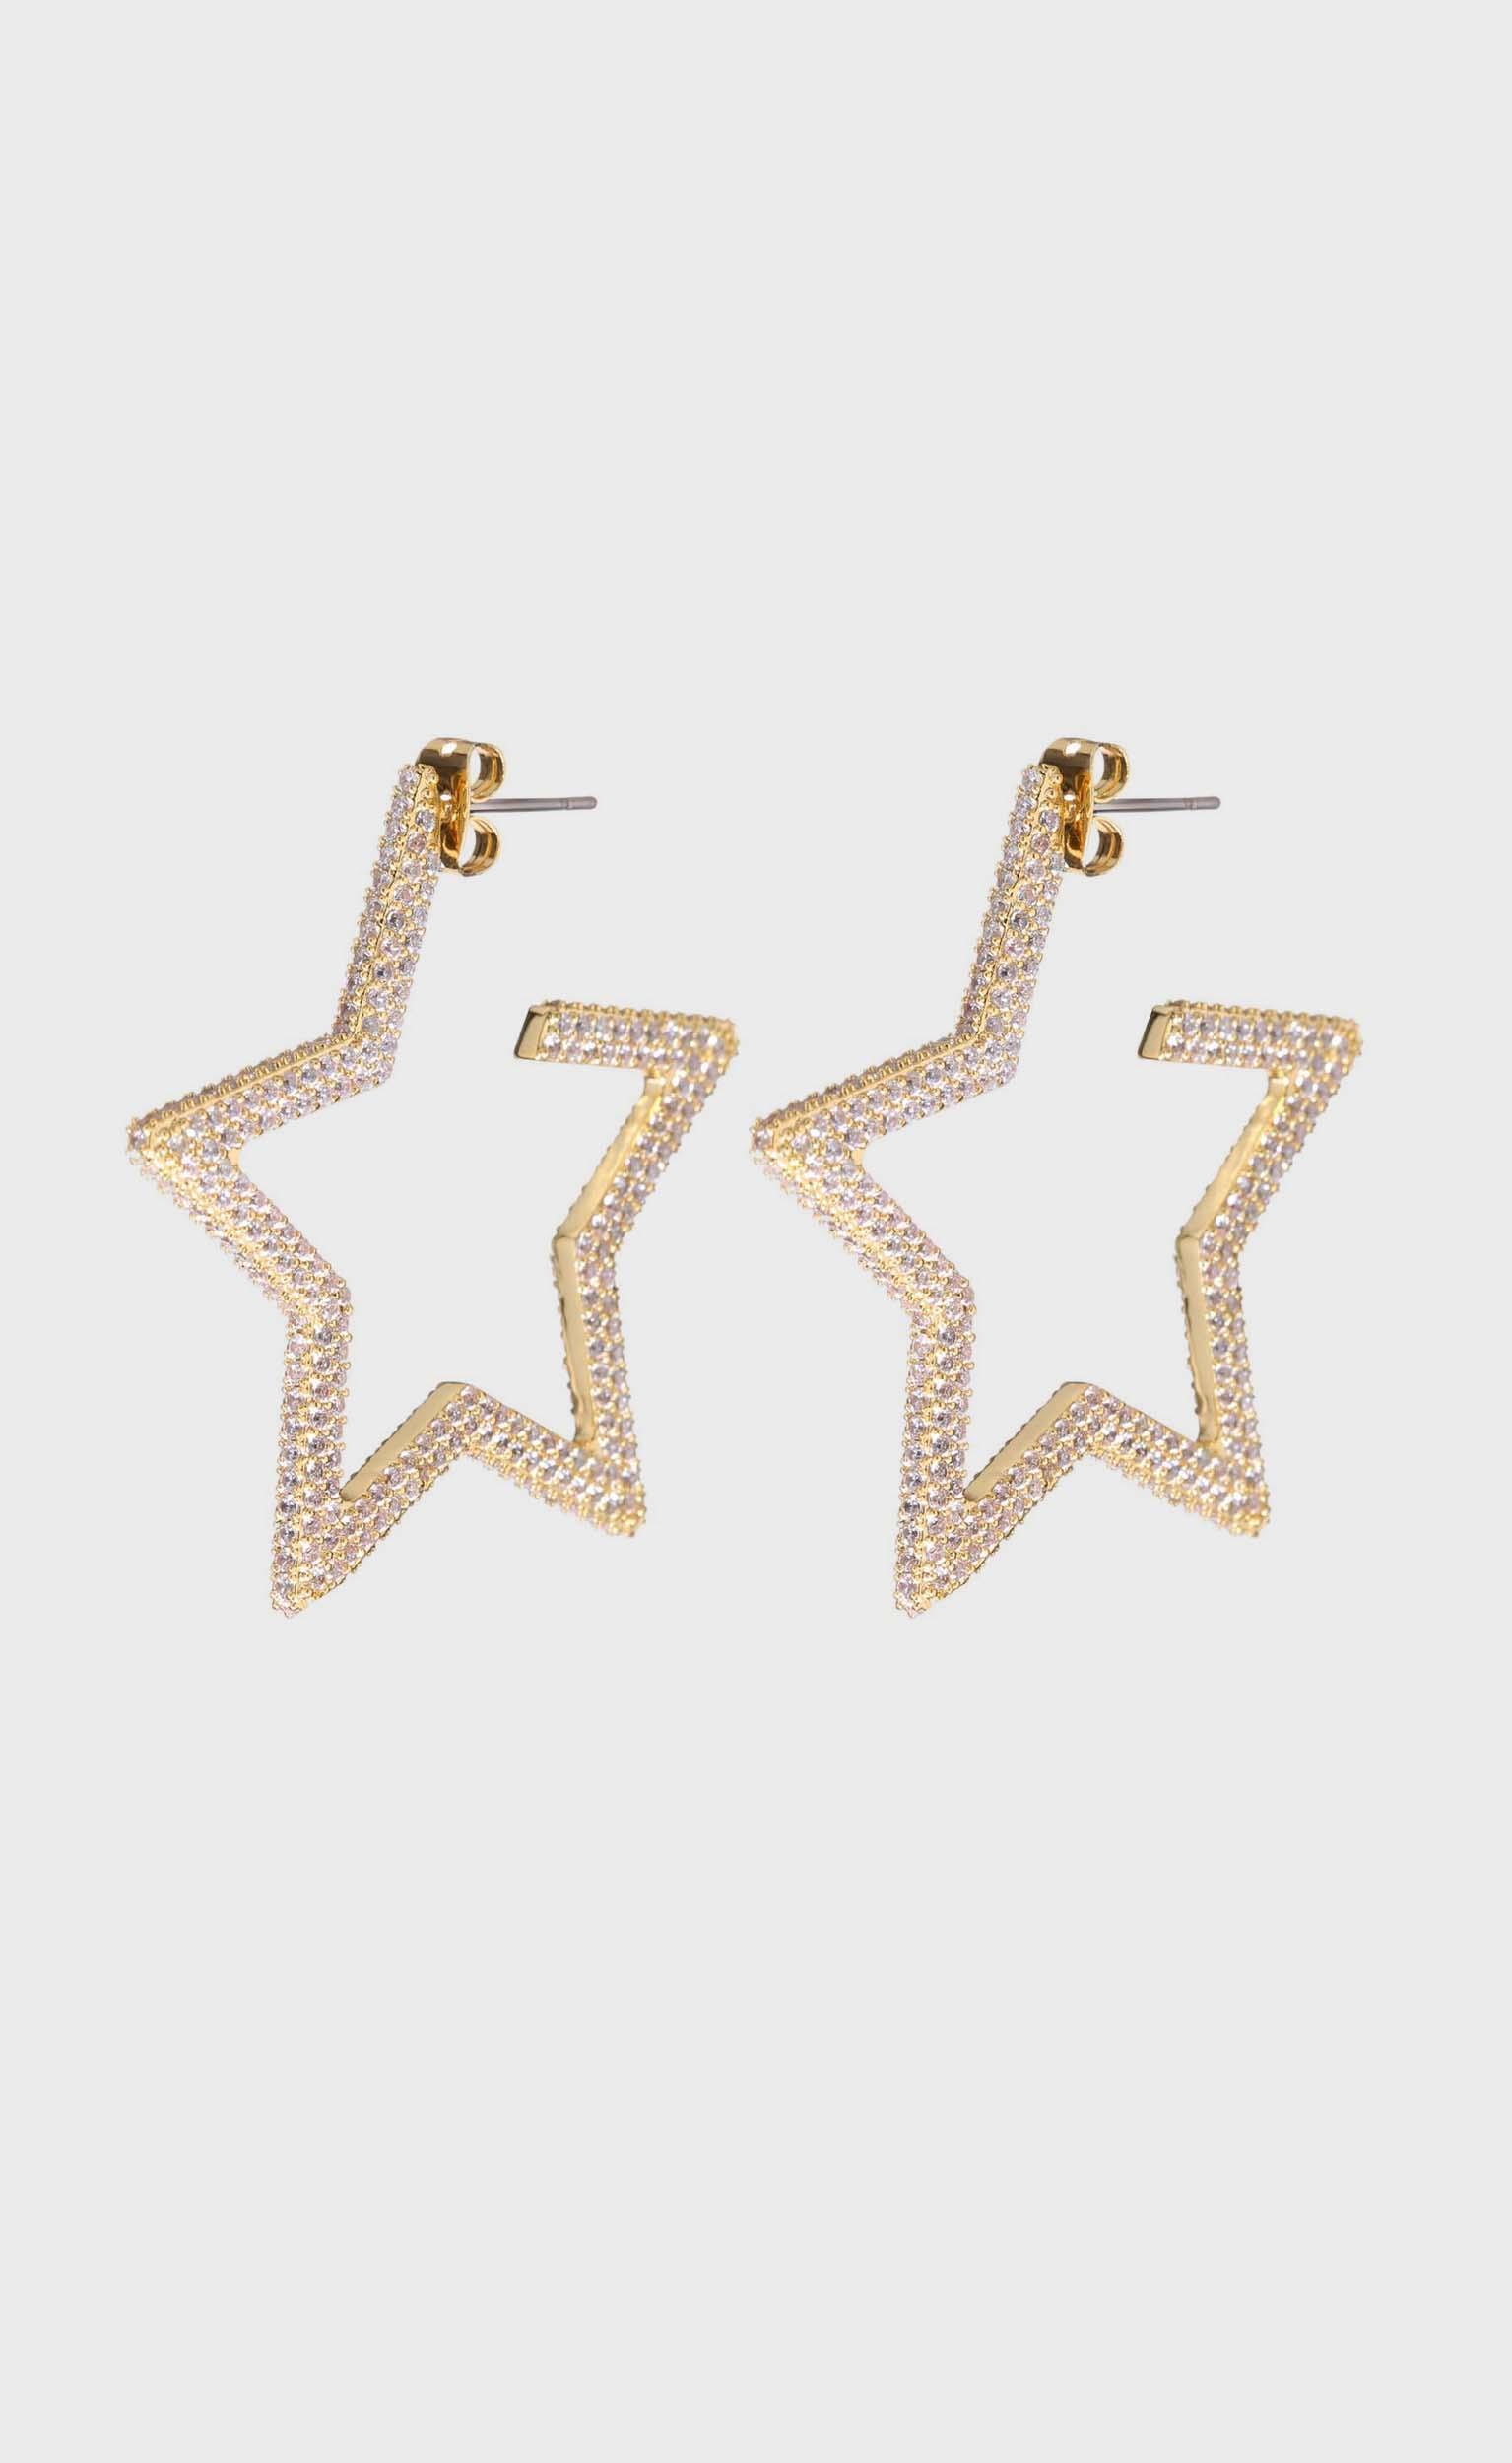 Luv AJ - Pave Star Hoops in Gold, , hi-res image number null